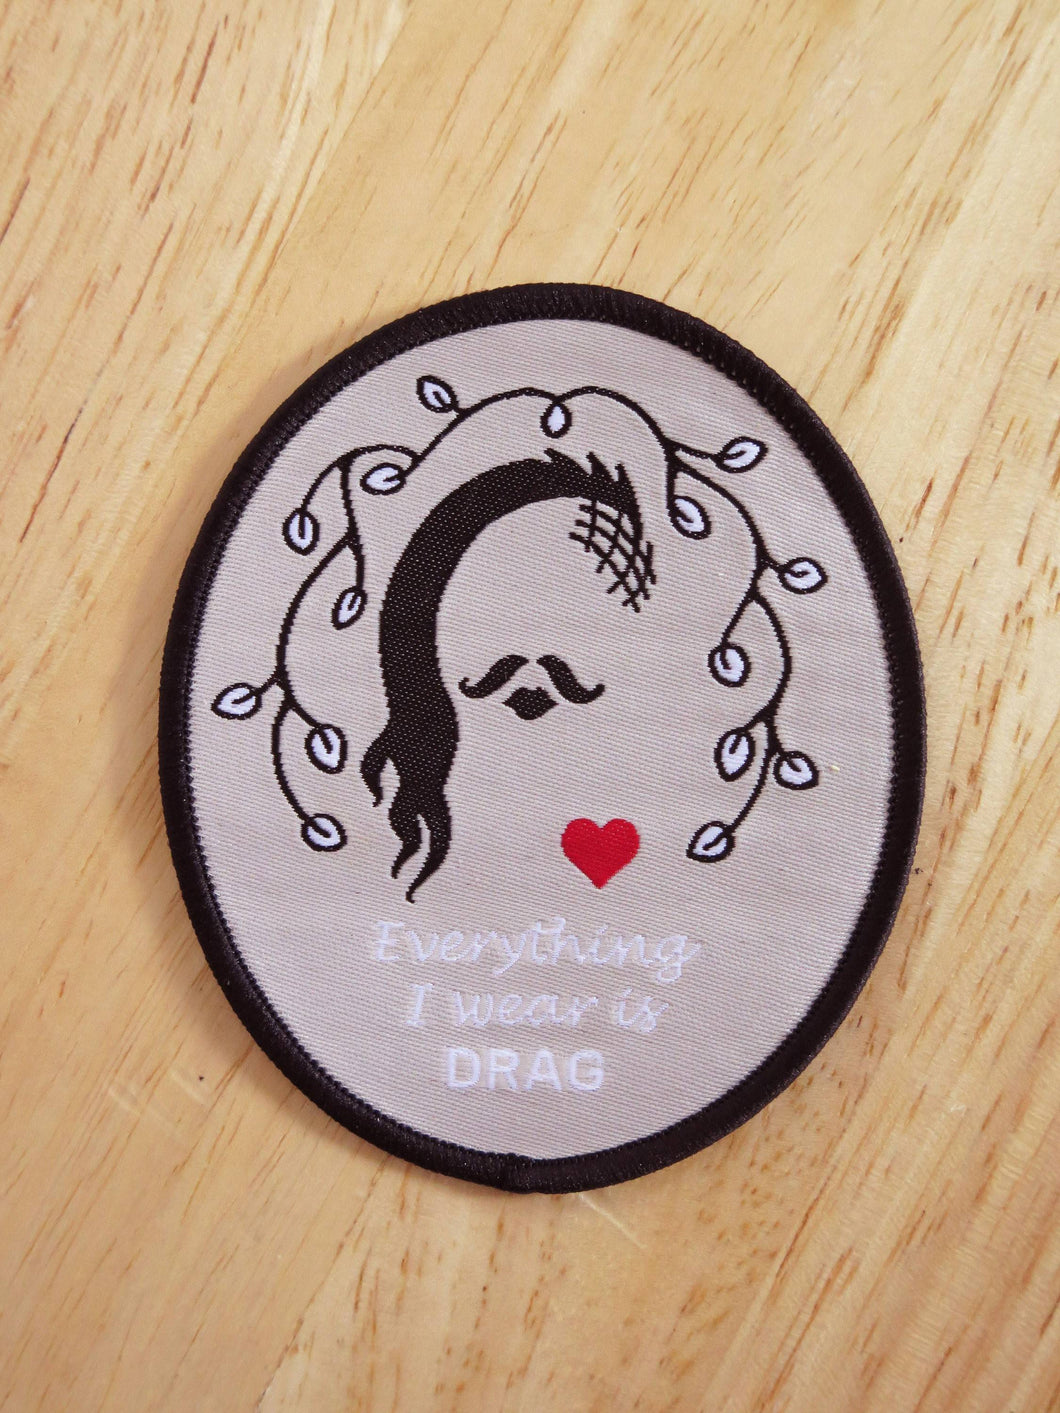 Nonbinary/Trans/Genderqueer Iron-On "Everything I Wear is Drag" Patch Queer LGBTQIA+